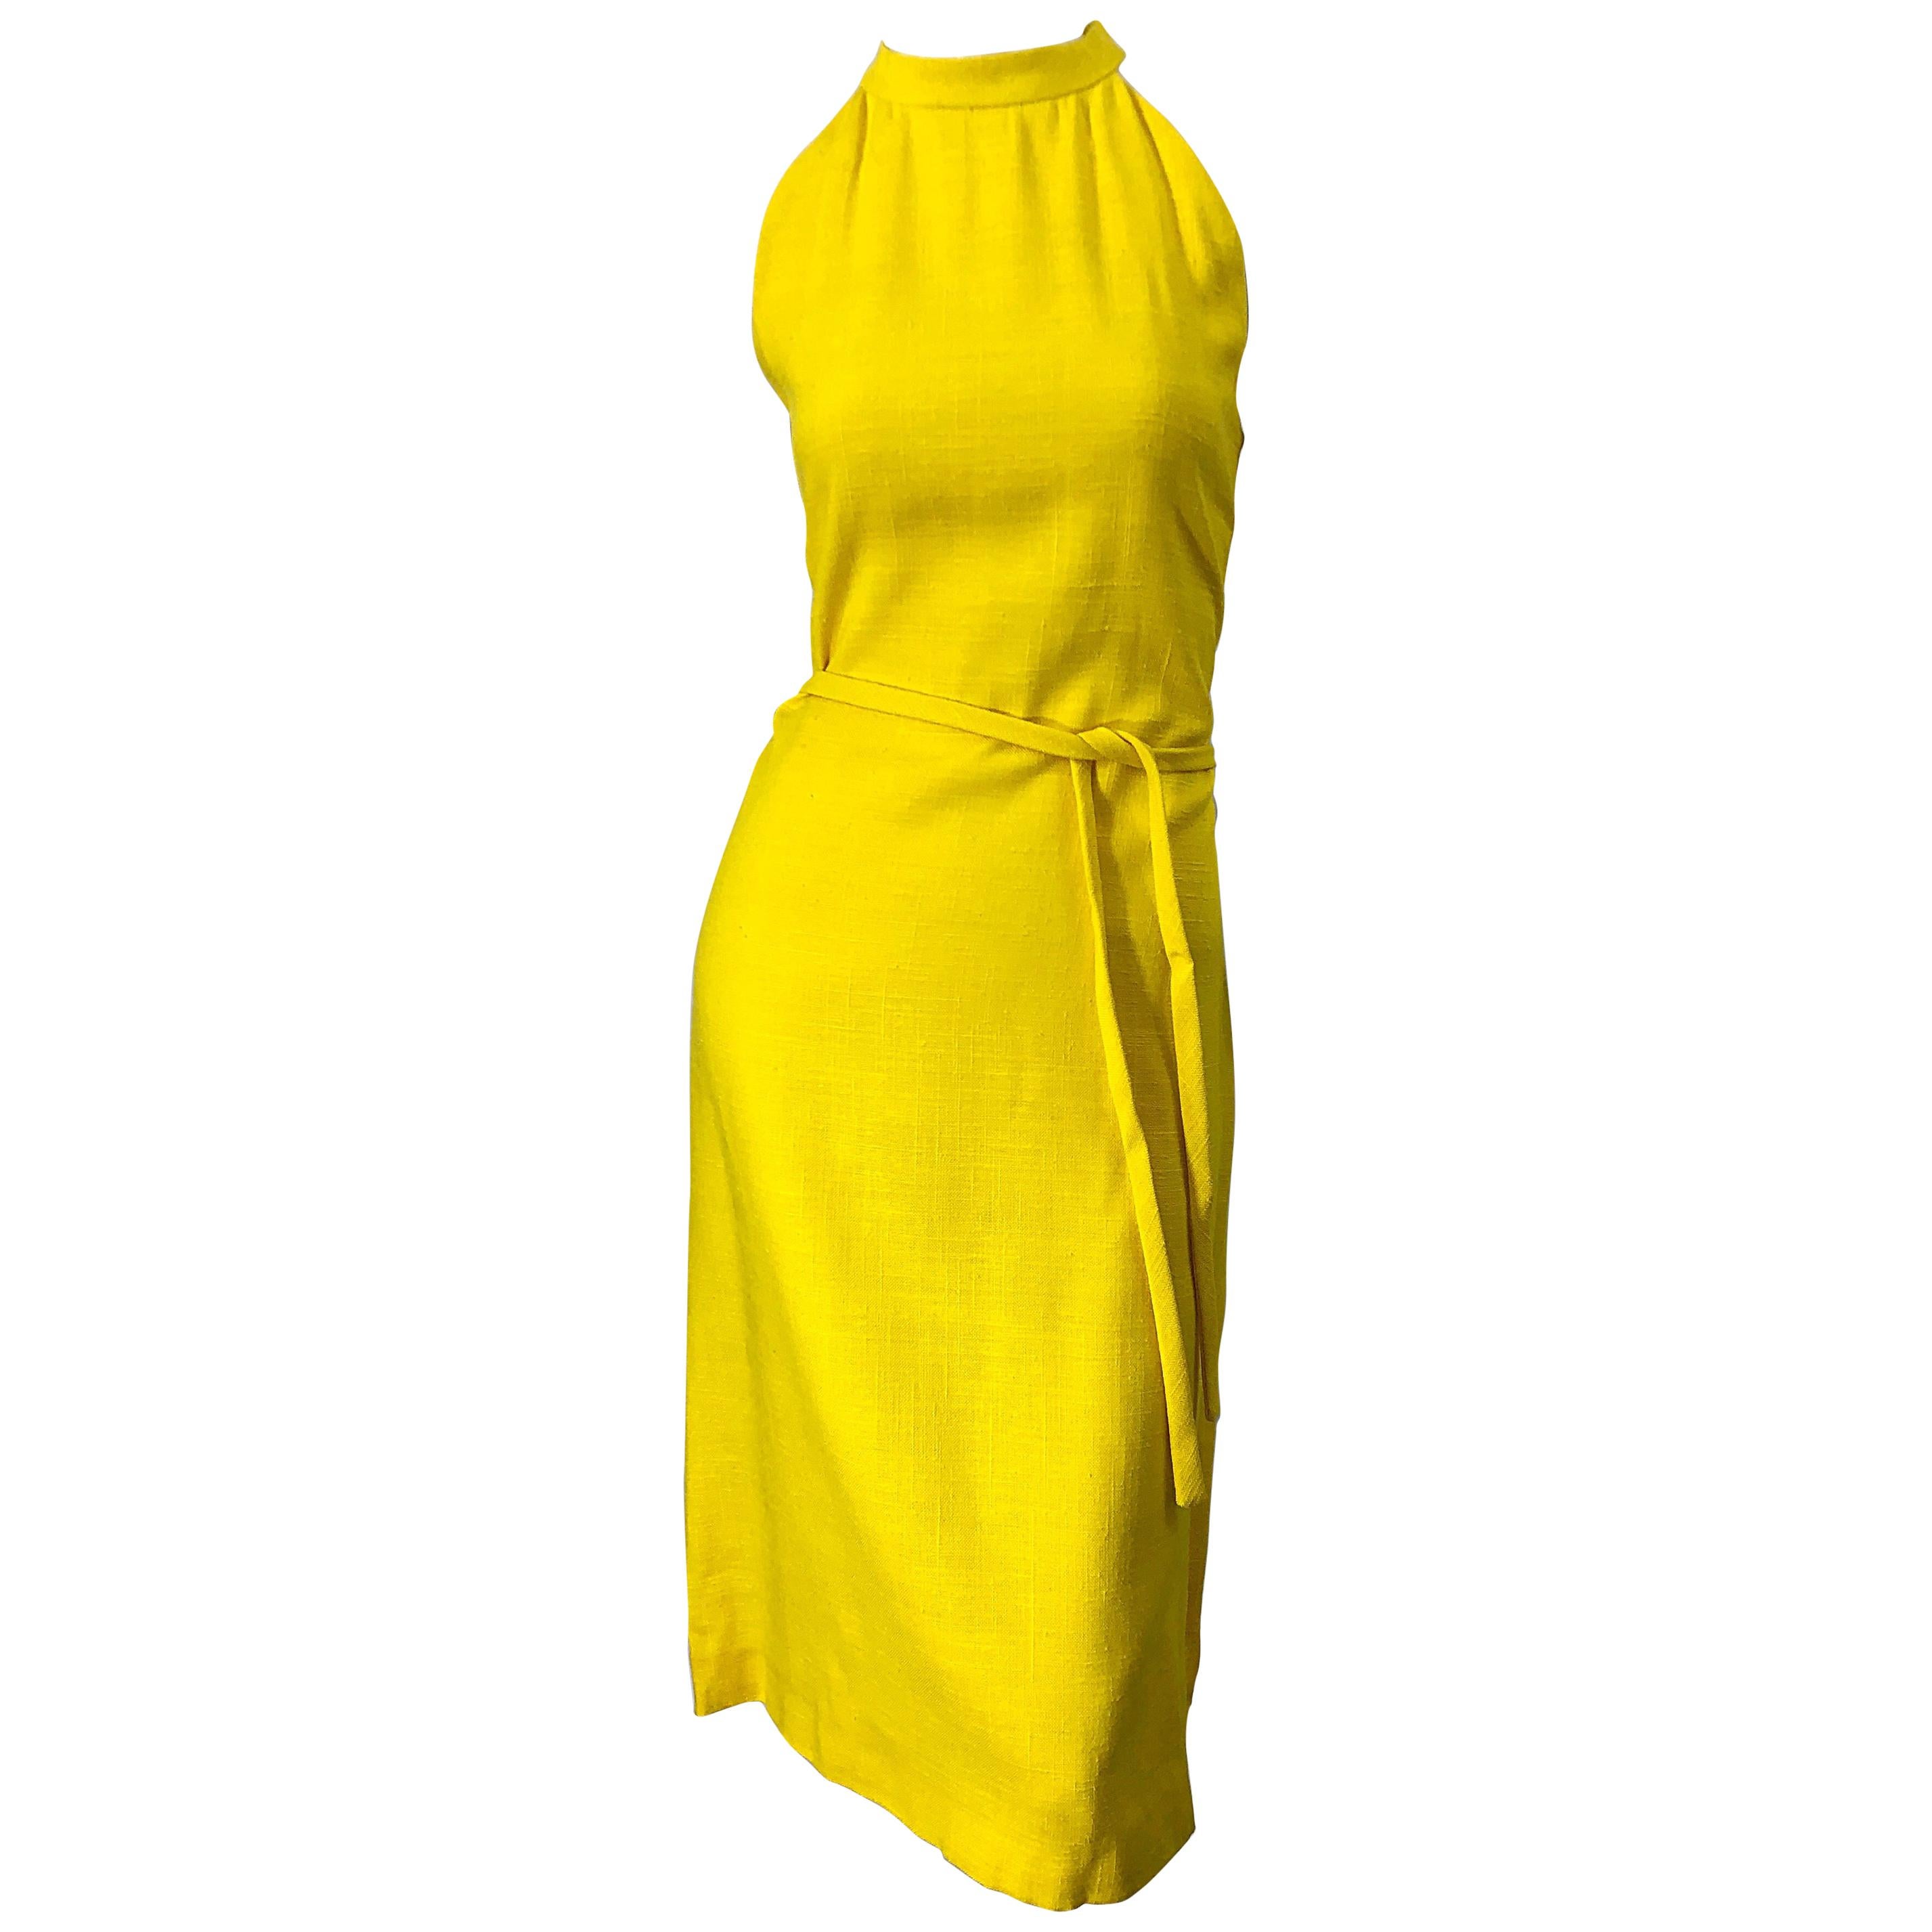 1960s Pierre Cardin Canary Yellow Linen Belted Vintage 60s Sleeveless Dress